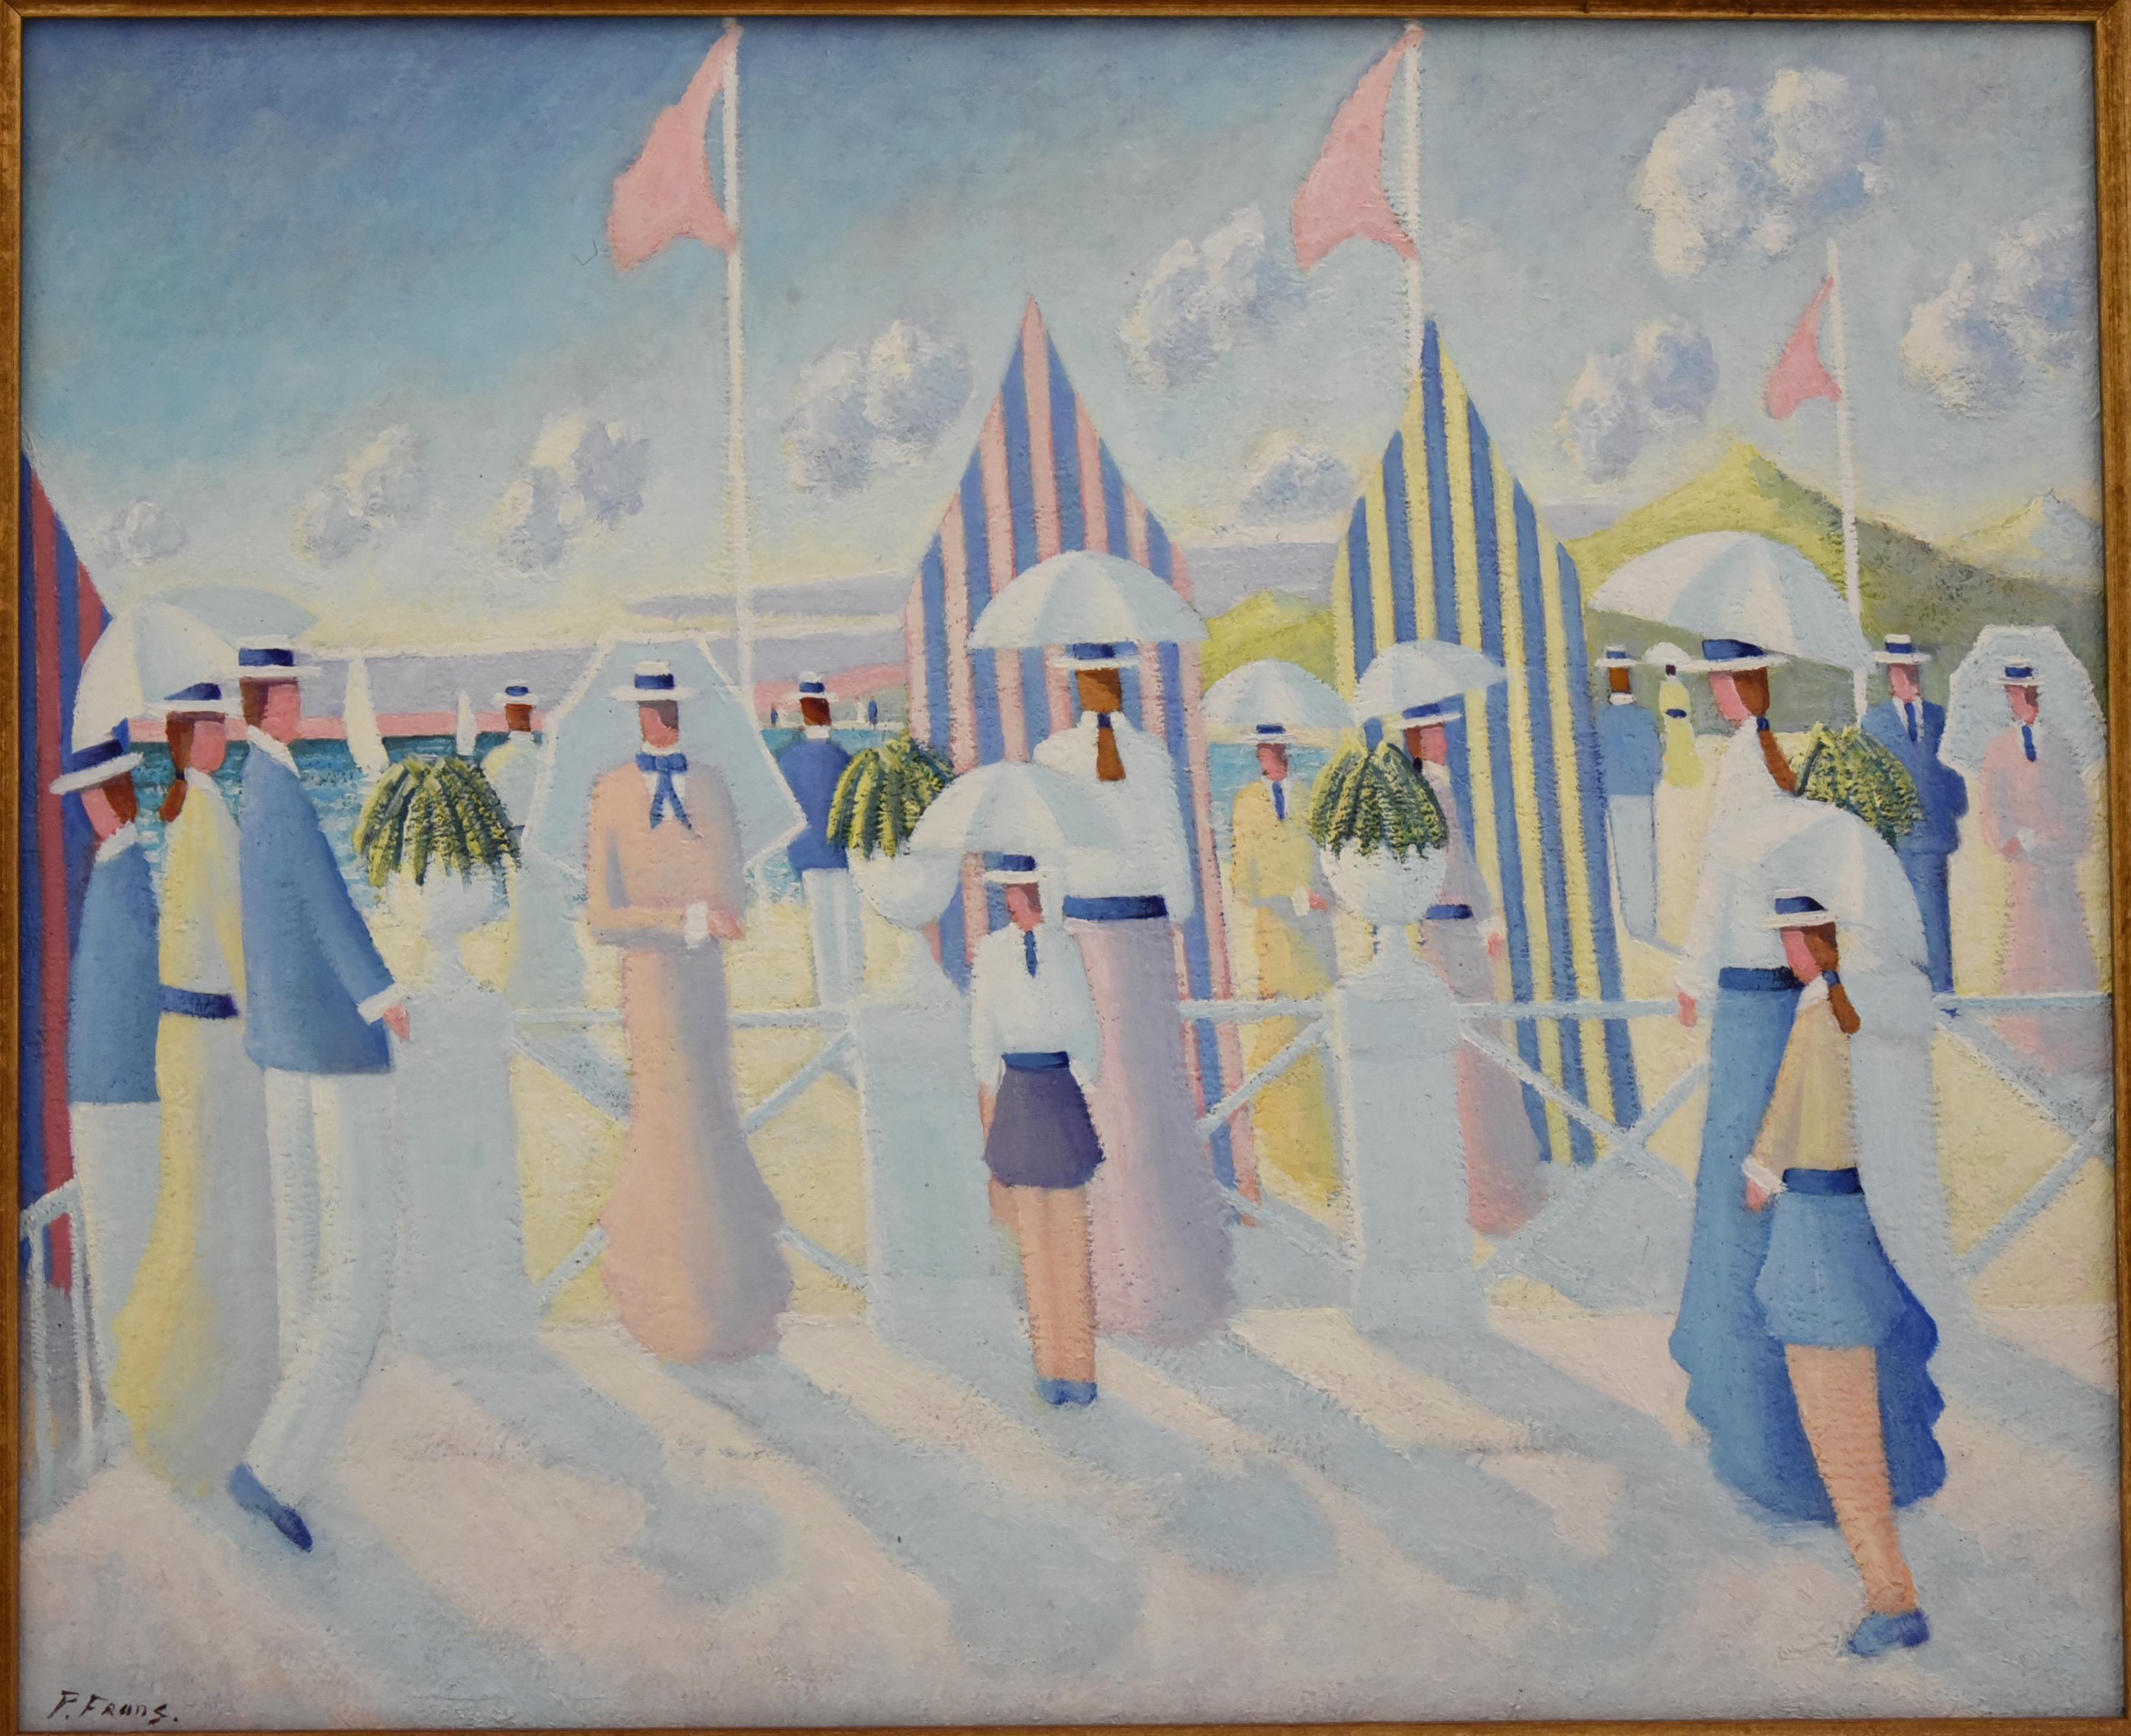 Painting of people walking on the beach promenade at the French coast.
By the Belgian painter Paul Frans (1958)
The work has beautiful pastel colors.
Titled: La terrasse de la mer.
Size of the frame:
H. 64.5 cm x L. 75.5 cm. x W. 5.5 cm.
H.